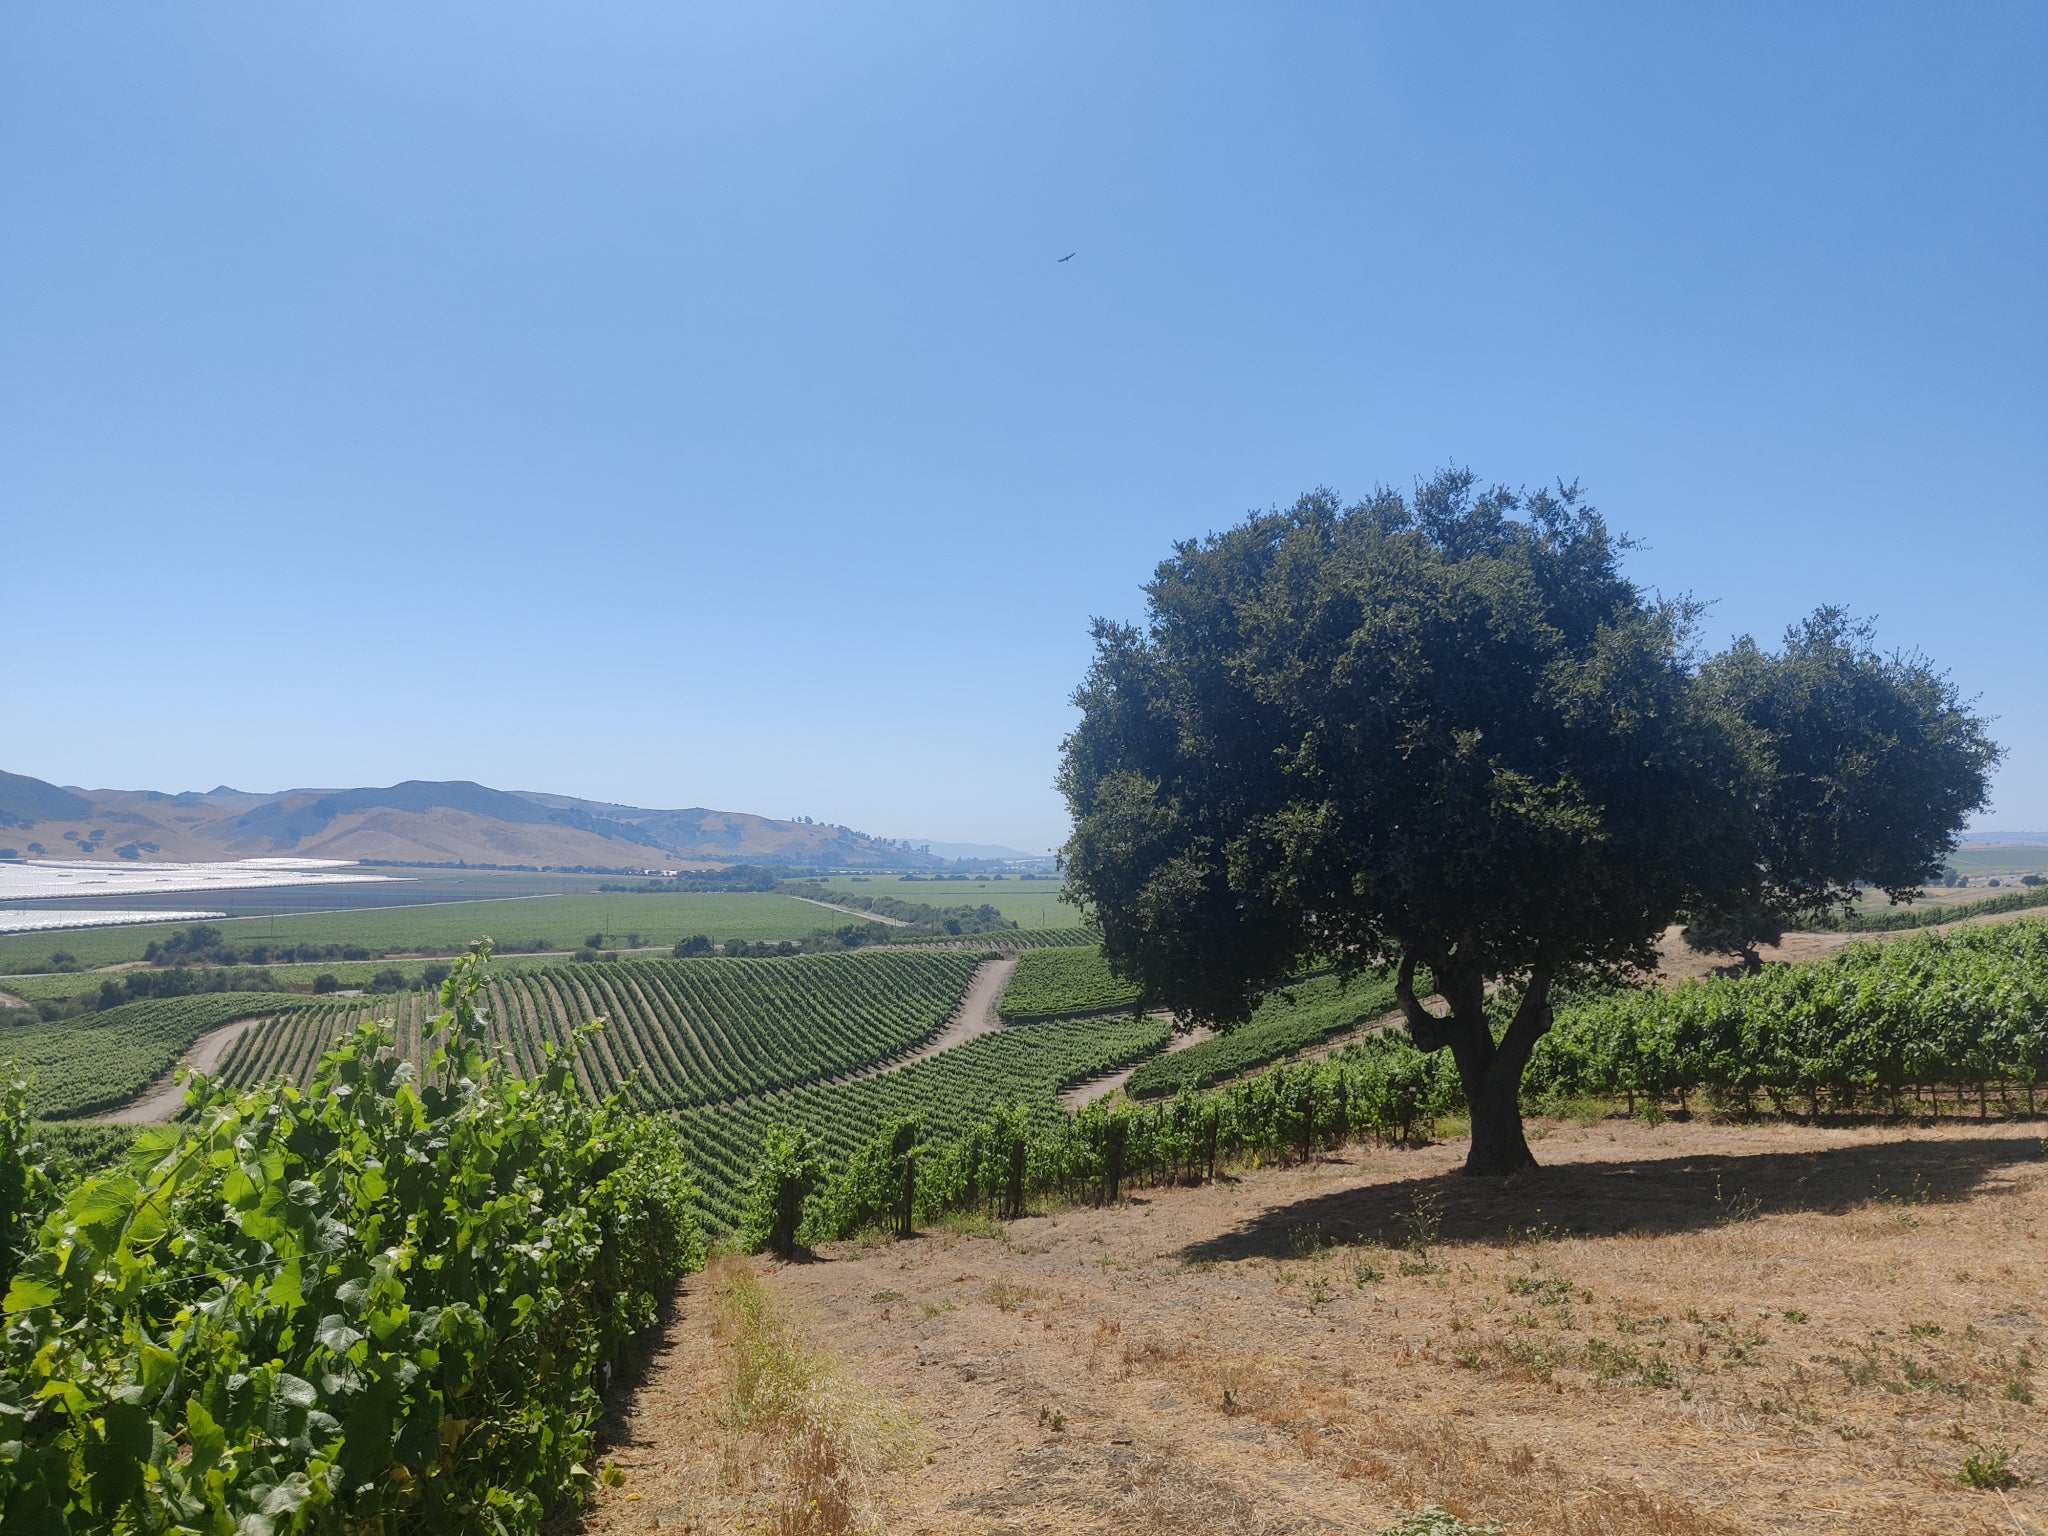 The Santa Ynez wine region has a highly desirable climate for wine-making